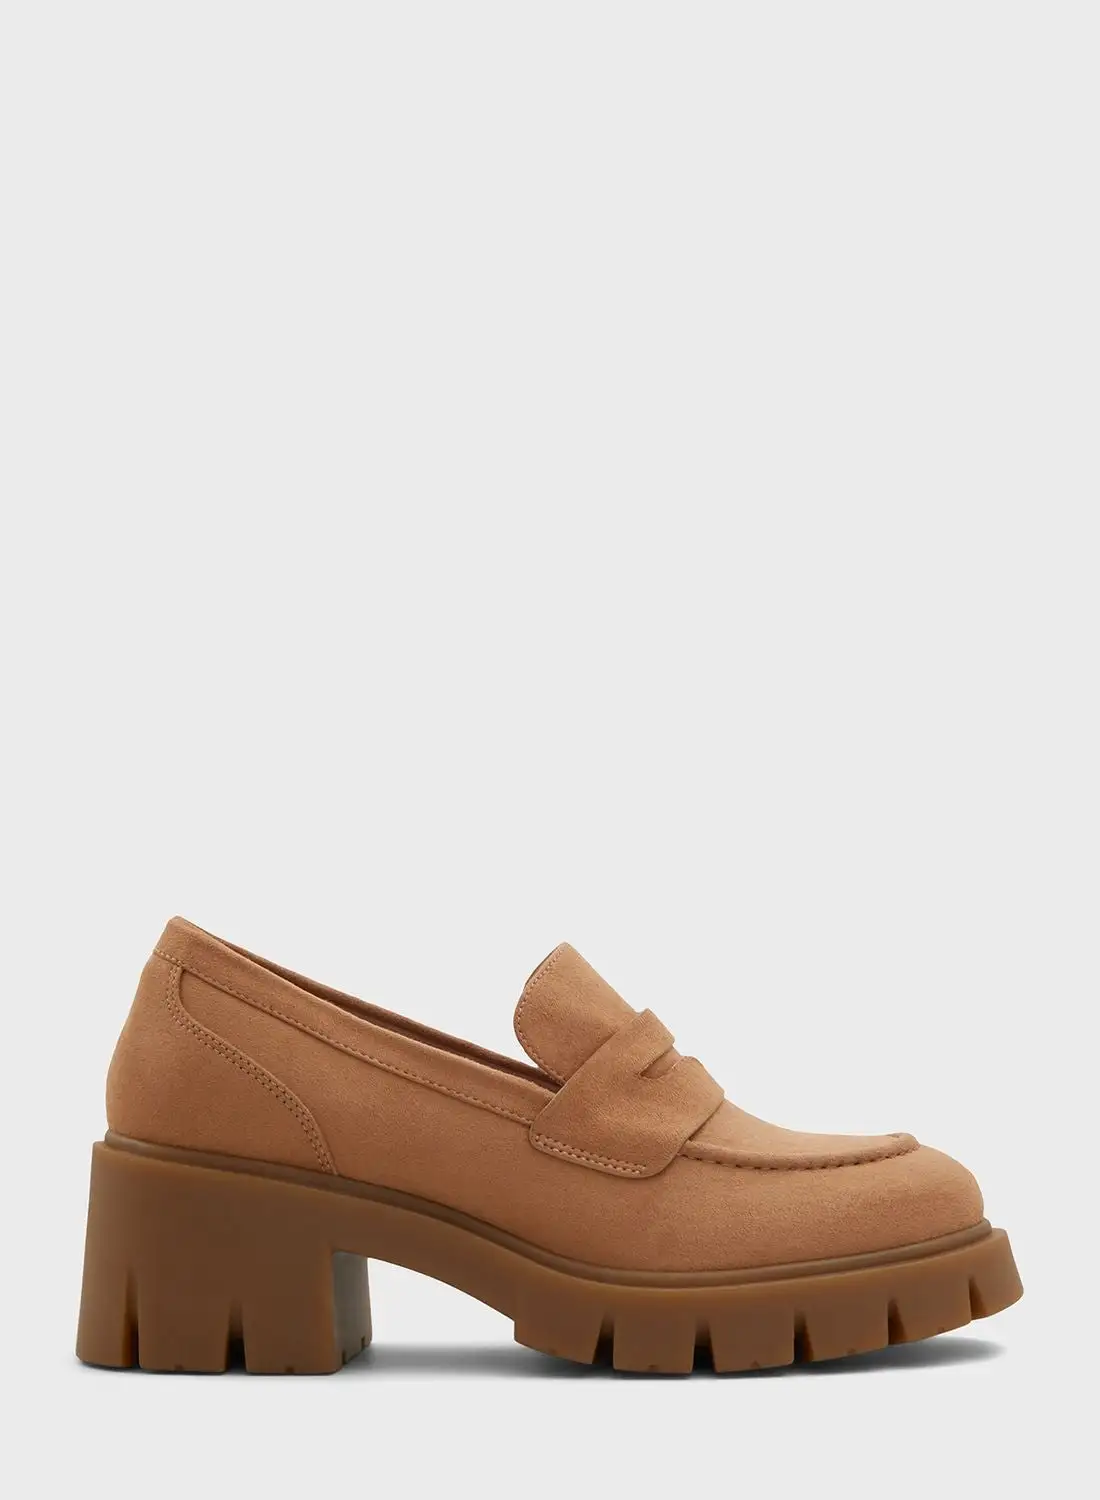 CALL IT SPRING Adriel Loafers